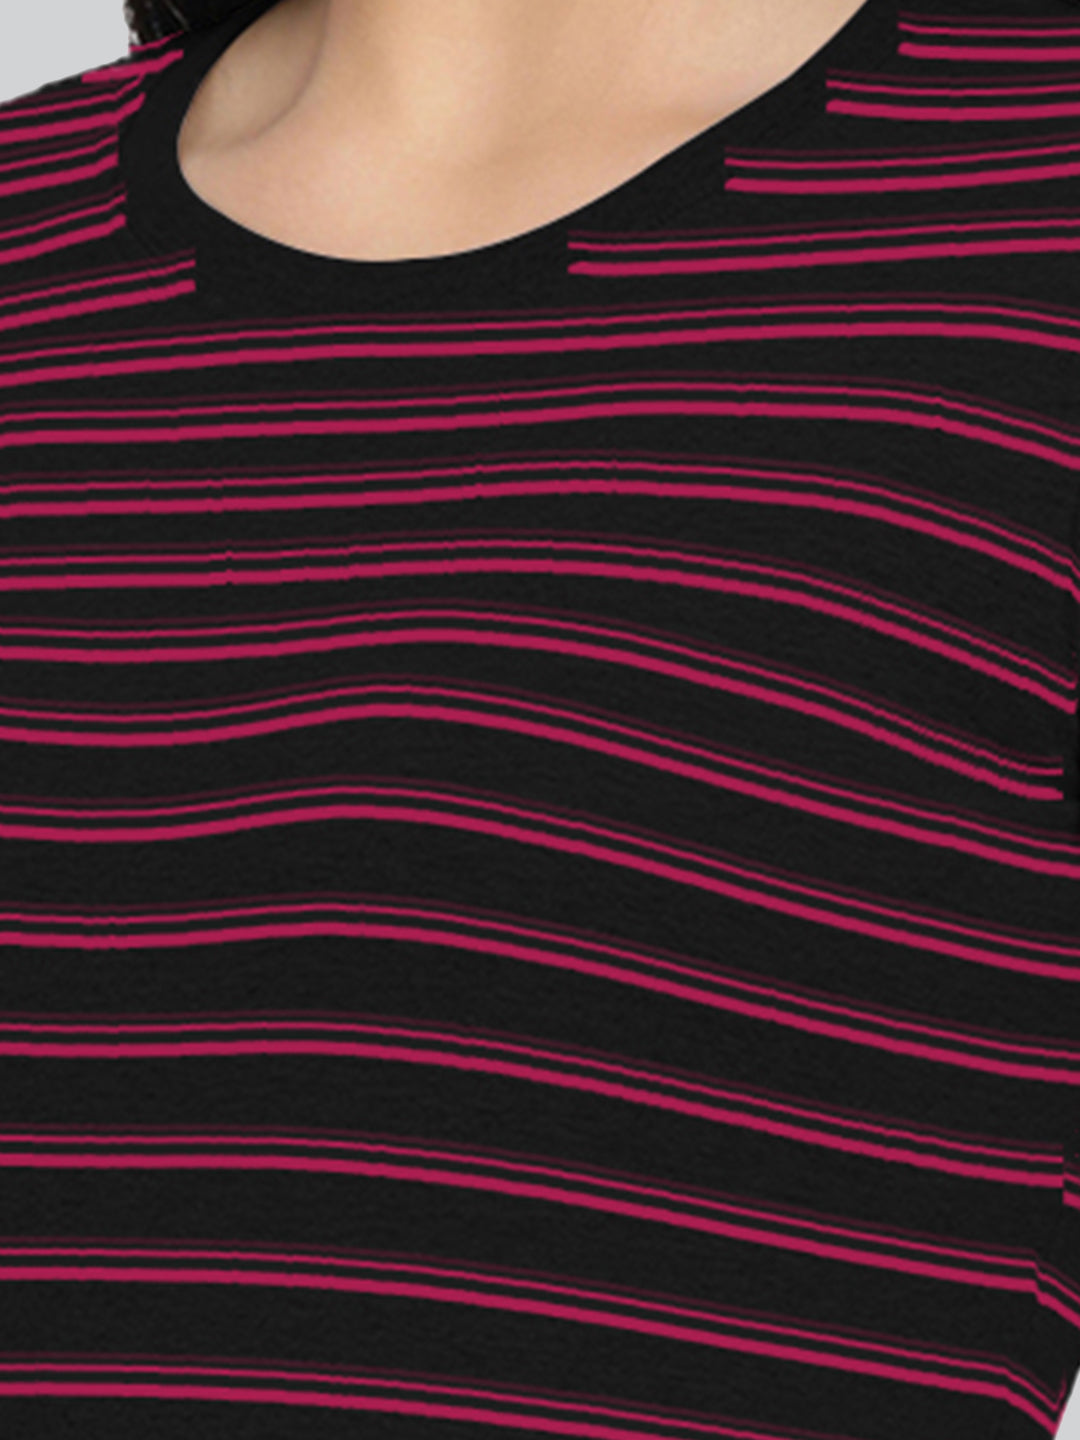 Black Base with Red Stripes Round Neck 3/4 Sleeve T-Shirt #408